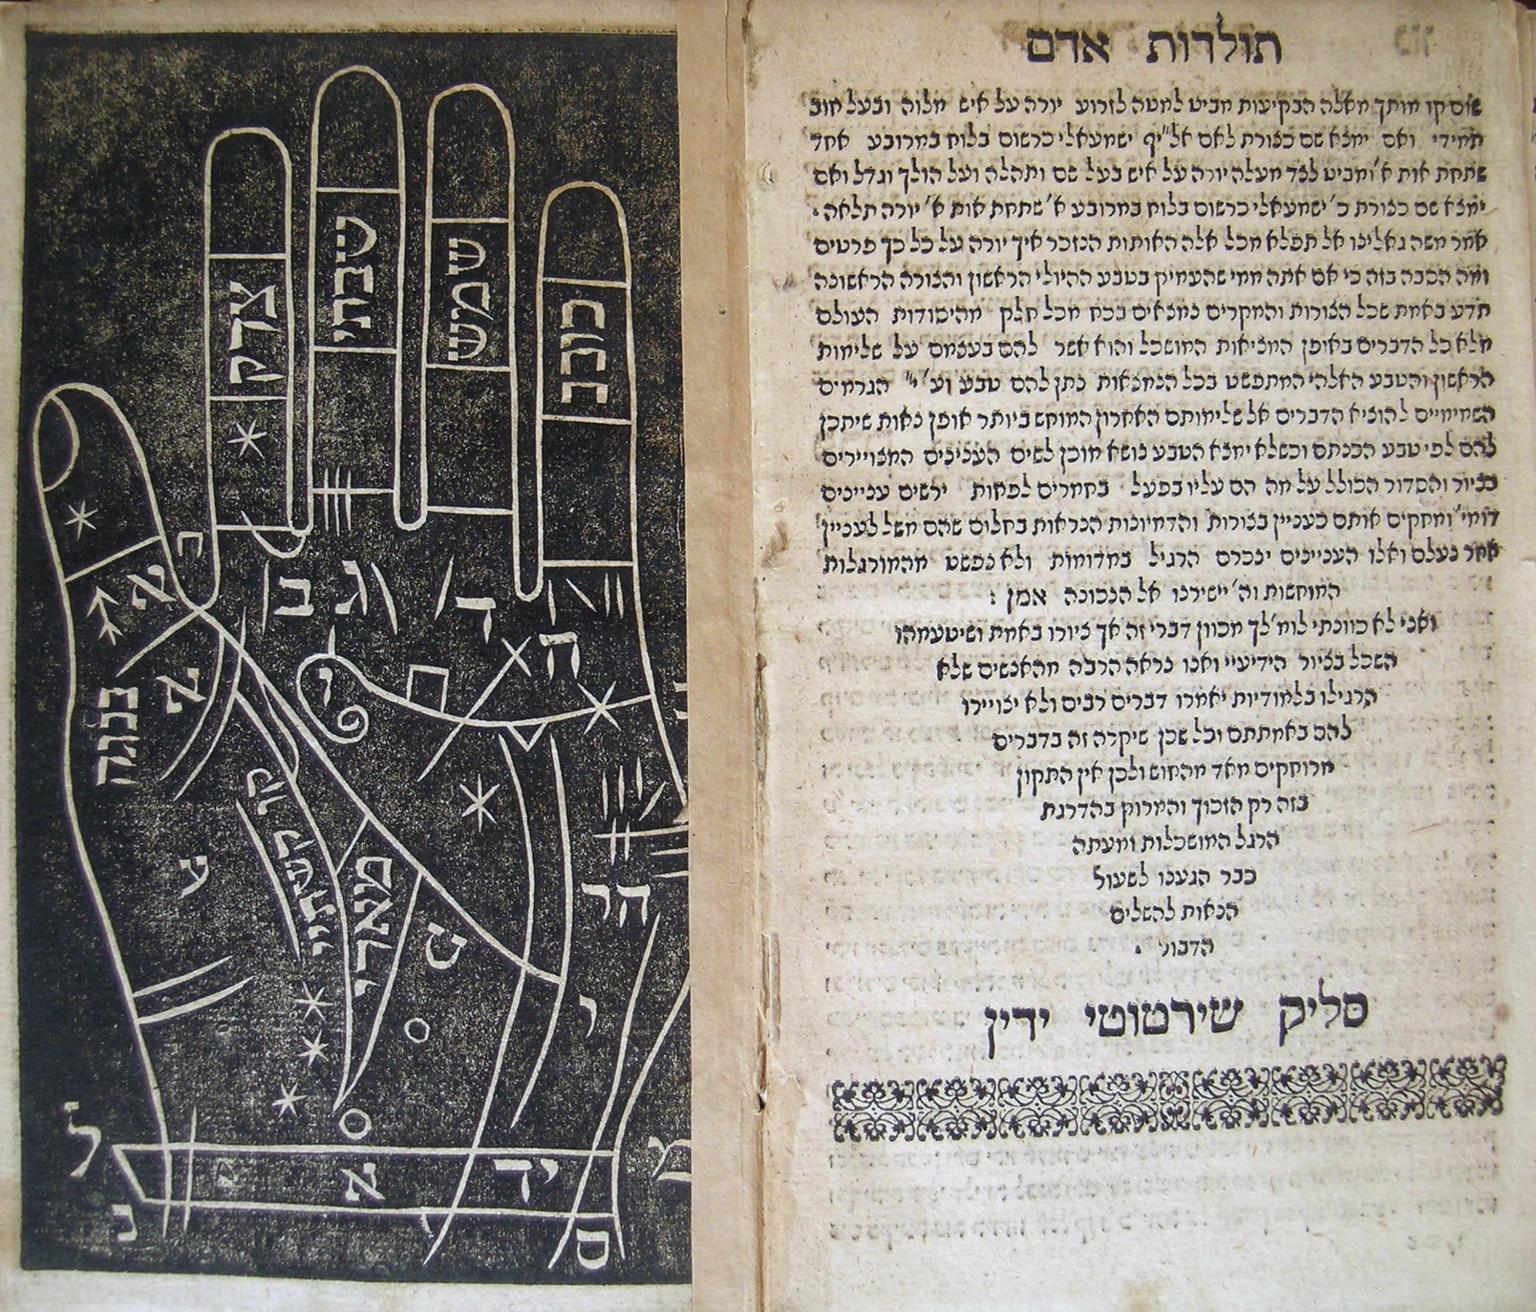 Facing-page printed text with Hebrew on right side and image of hand with Hebrew letters in side on left side.